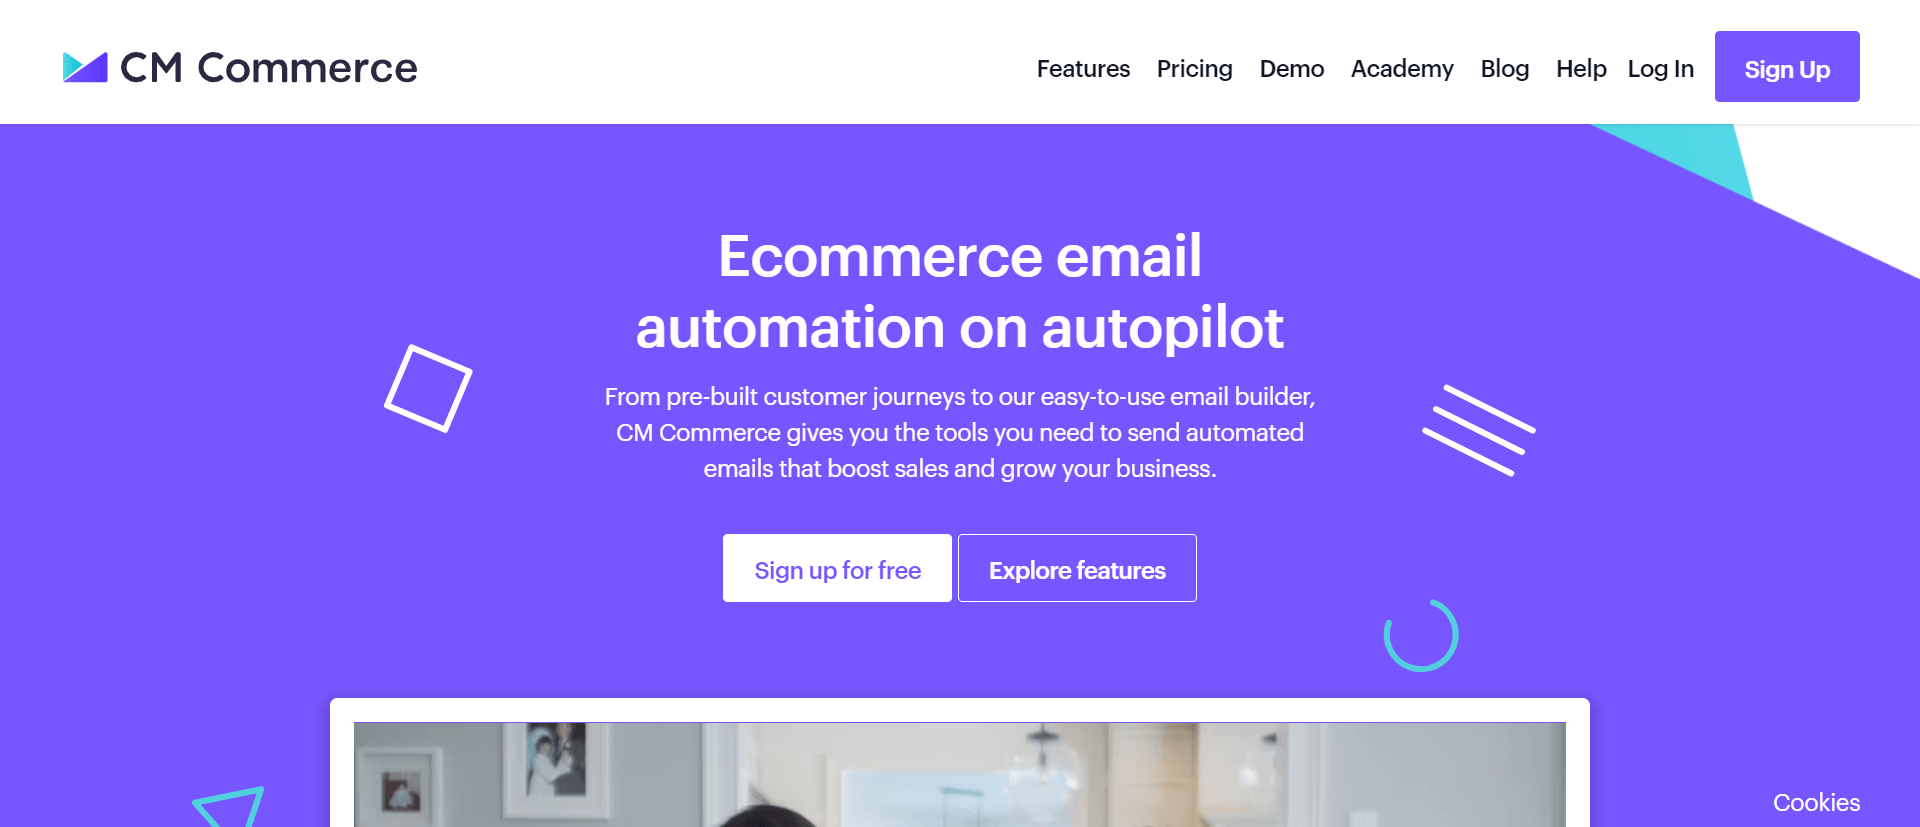 #14 CM Commerce is the email marketing platforms for Online stores